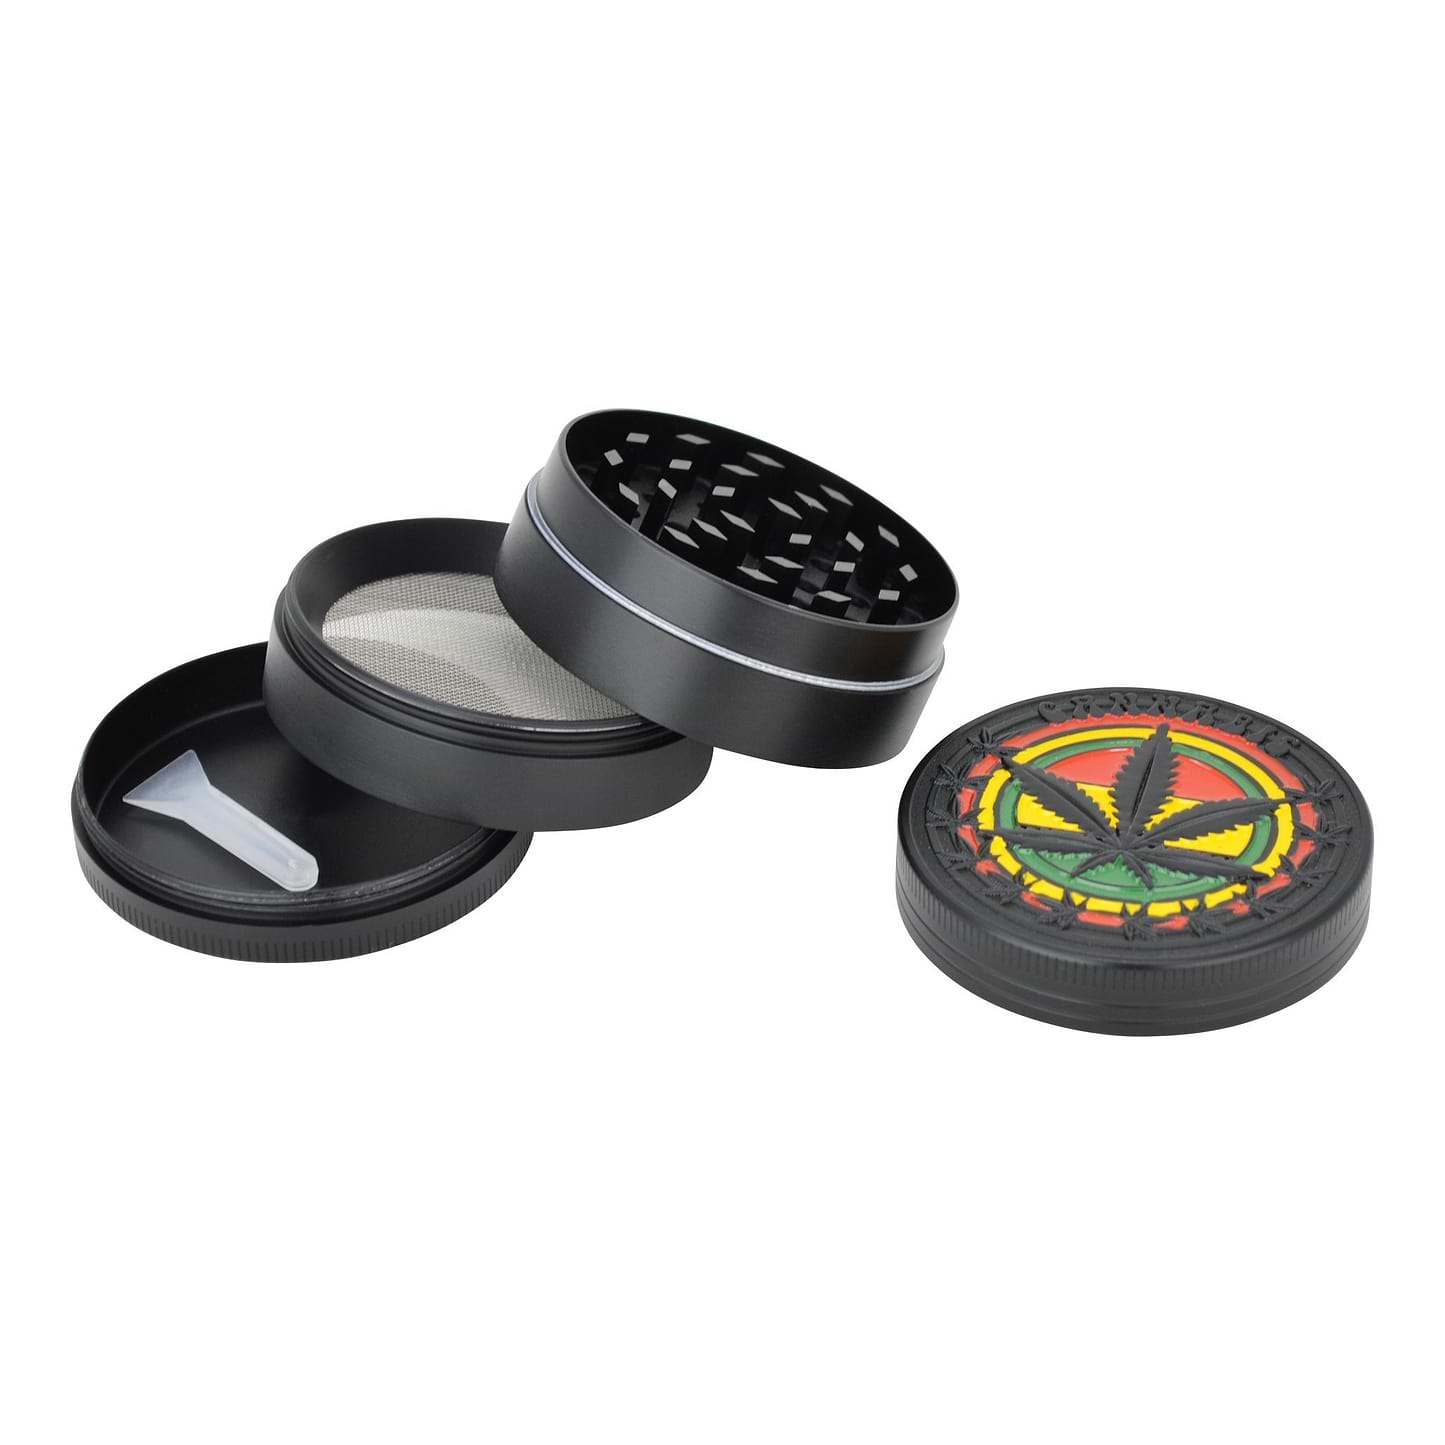 50mm round 4-part metal grinder smoking accessory with kiefcatcher with rasta weed leaf design on lid